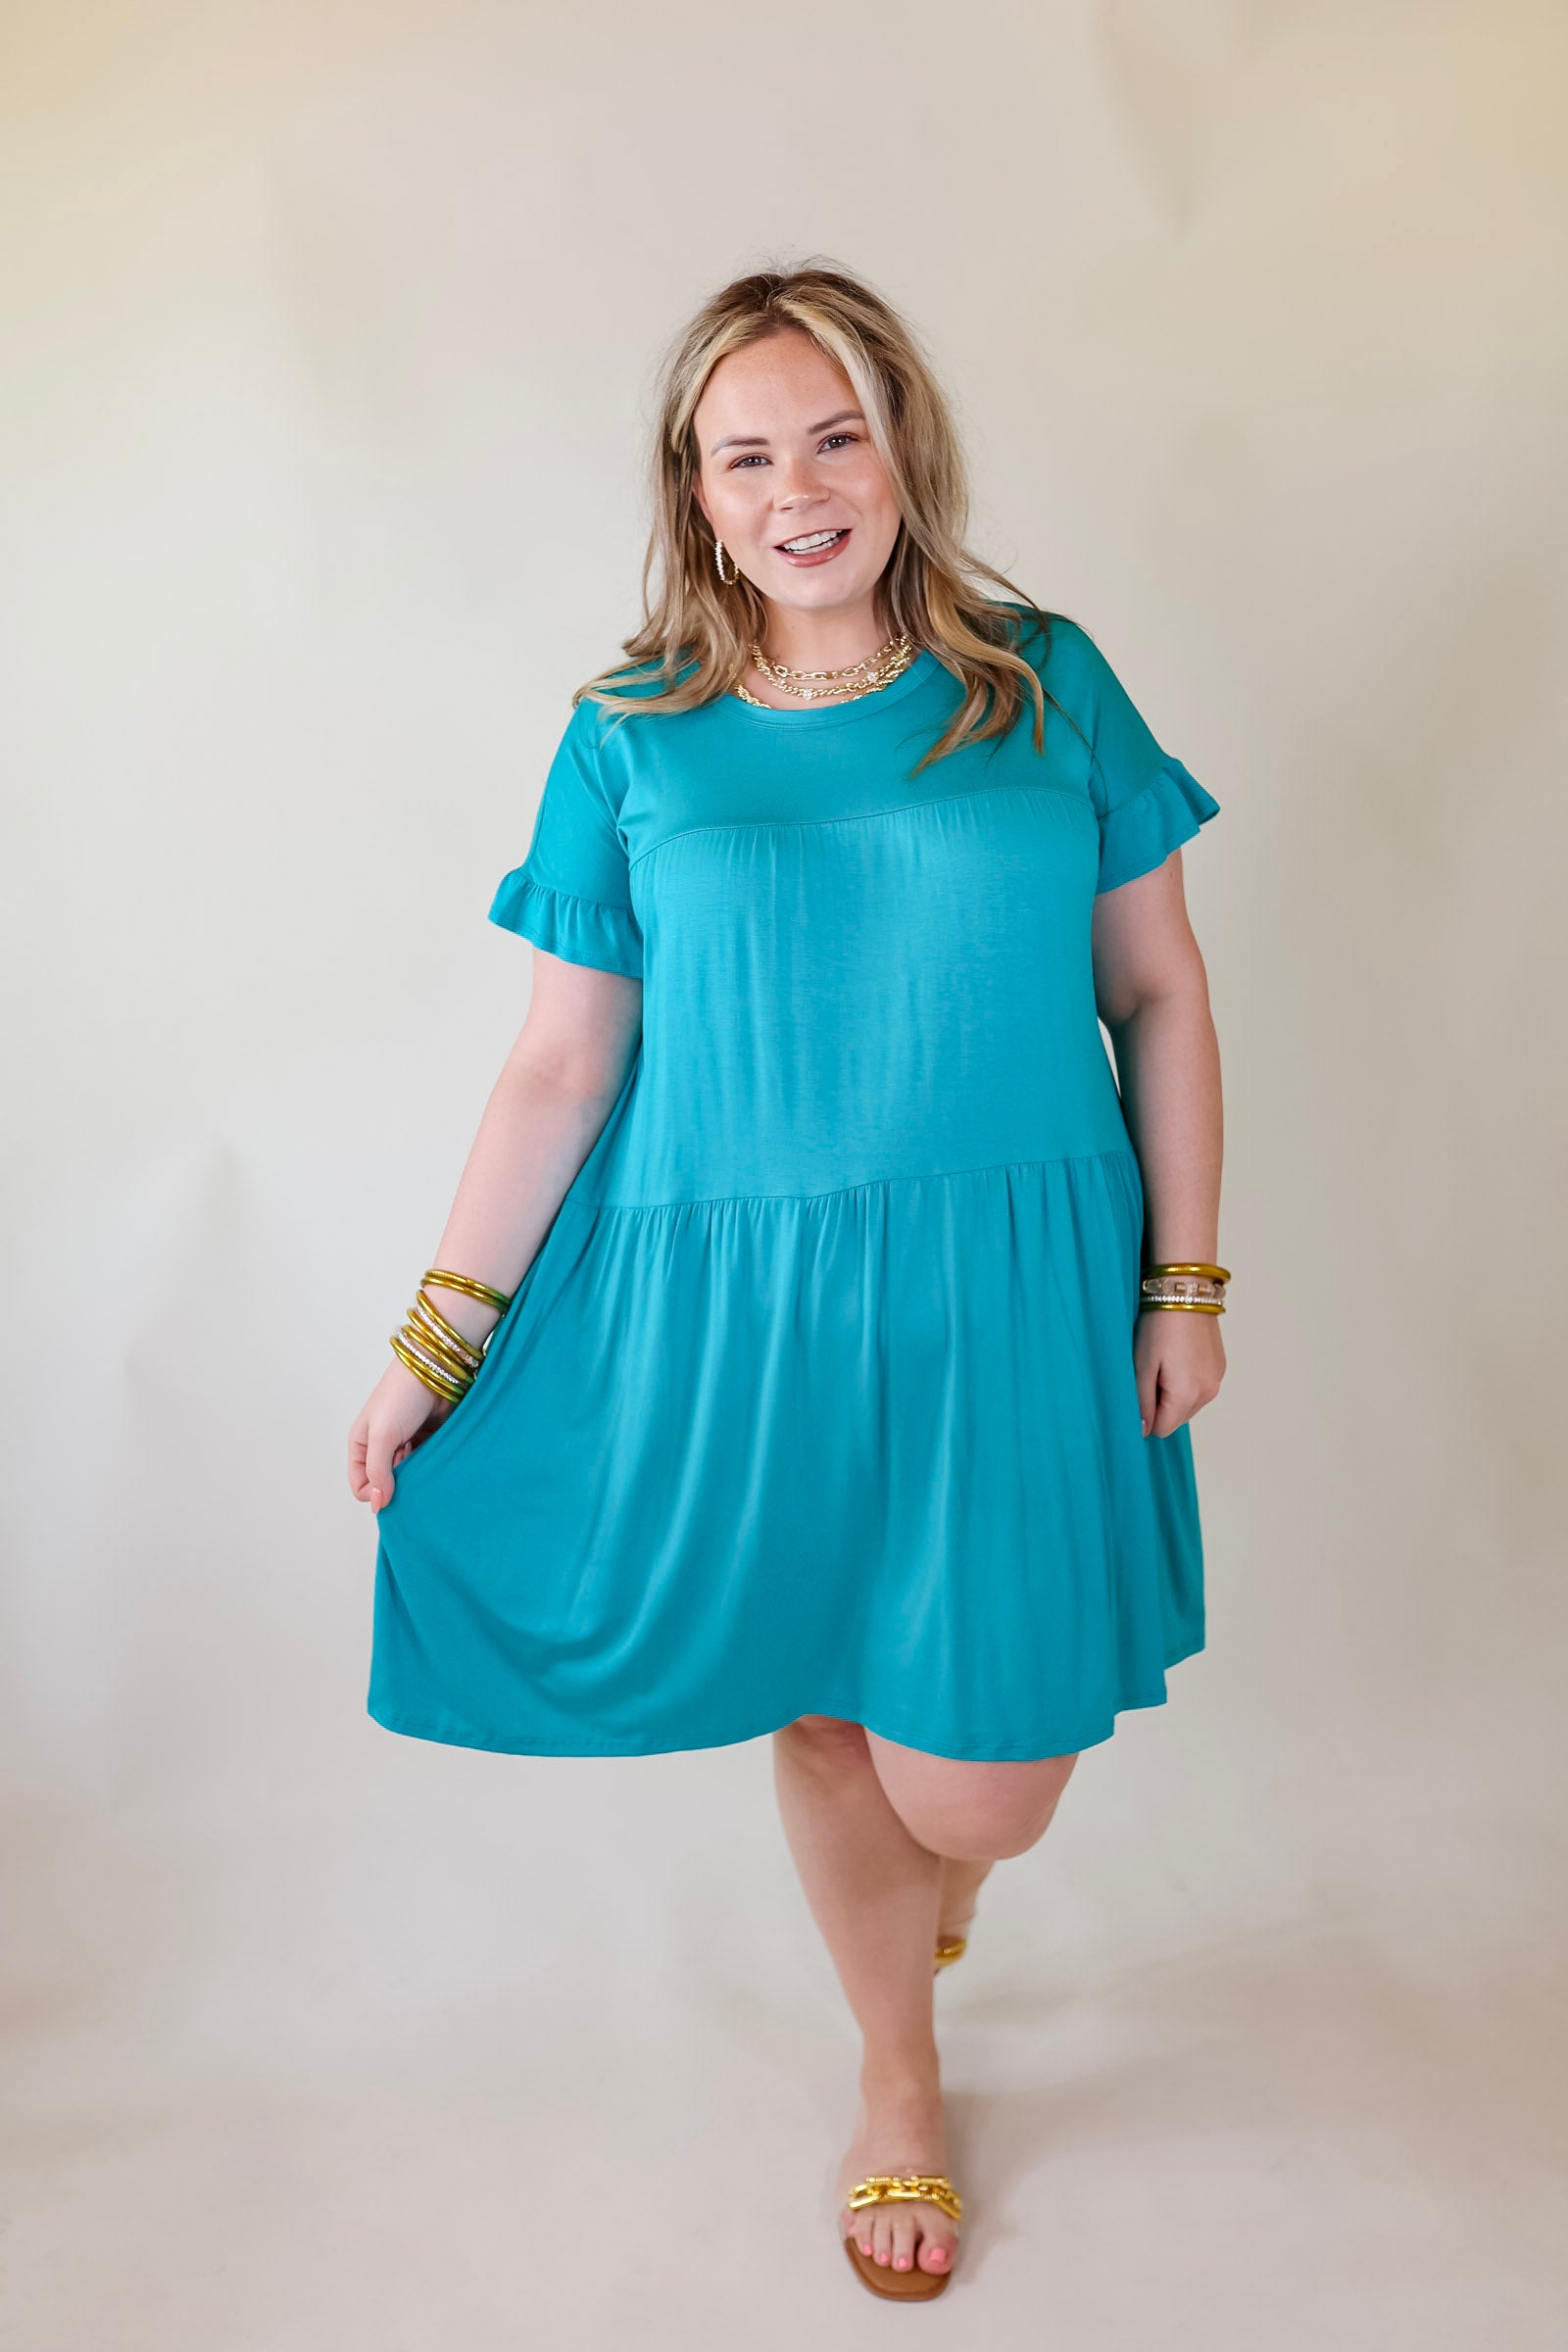 Gorgeous Girly Ruffle Sleeve Tiered Dress in Teal - Giddy Up Glamour Boutique